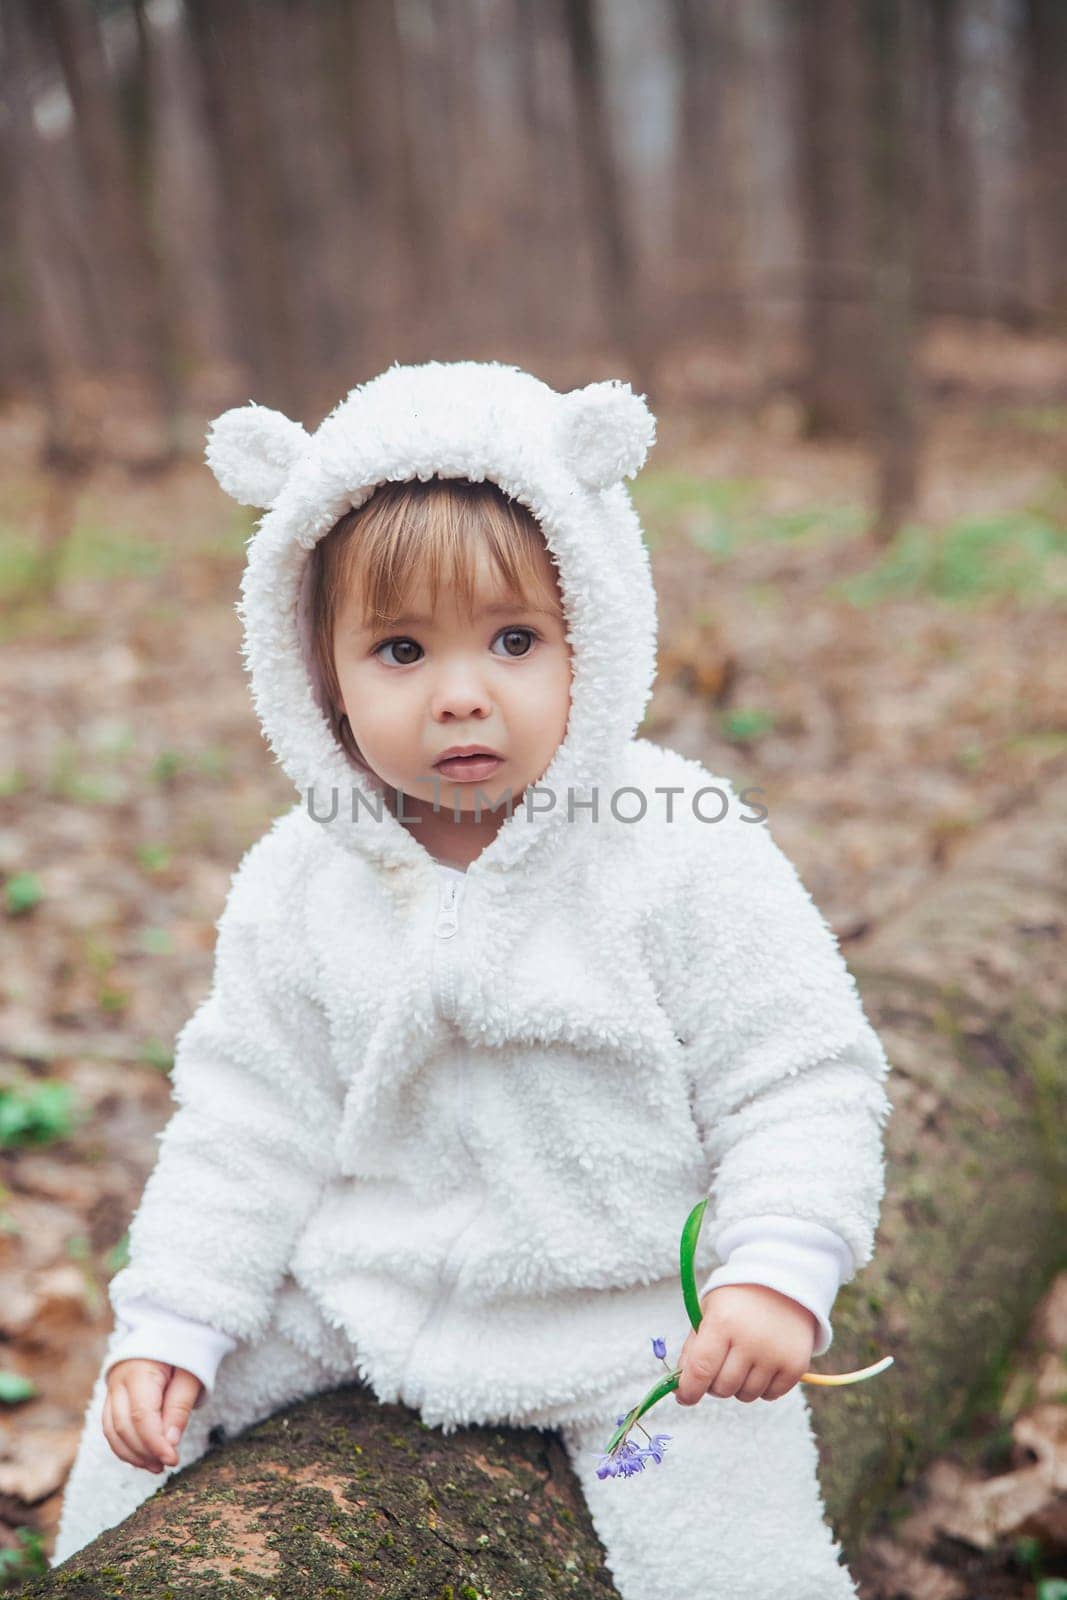 Adorable baby in a bear costume in the forest by a fallen tree.